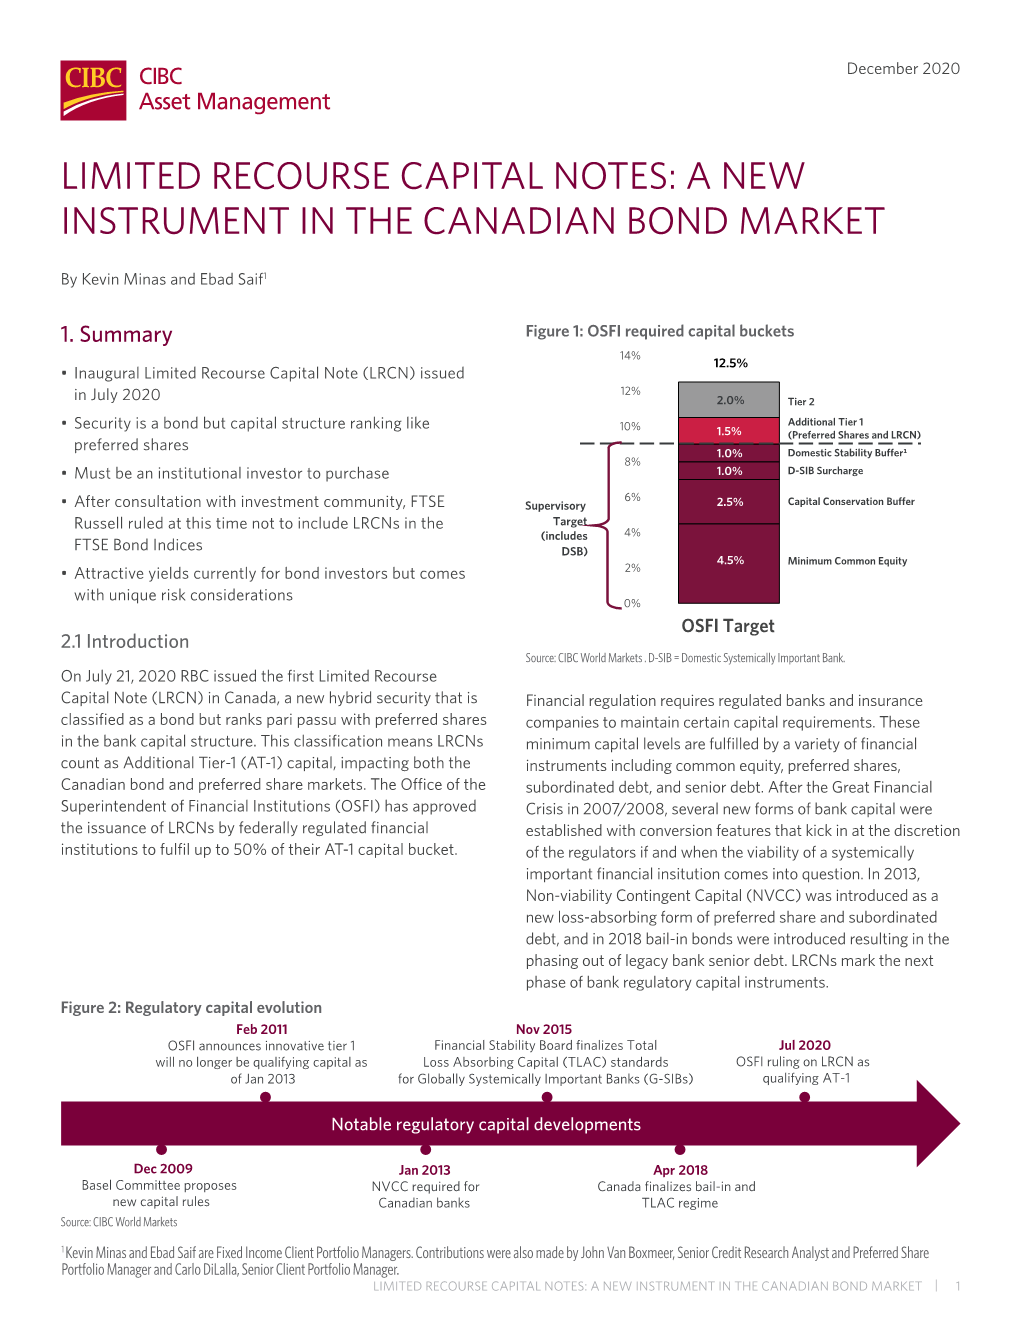 Limited Recourse Capital Notes: a New Instrument in the Canadian Bond Market